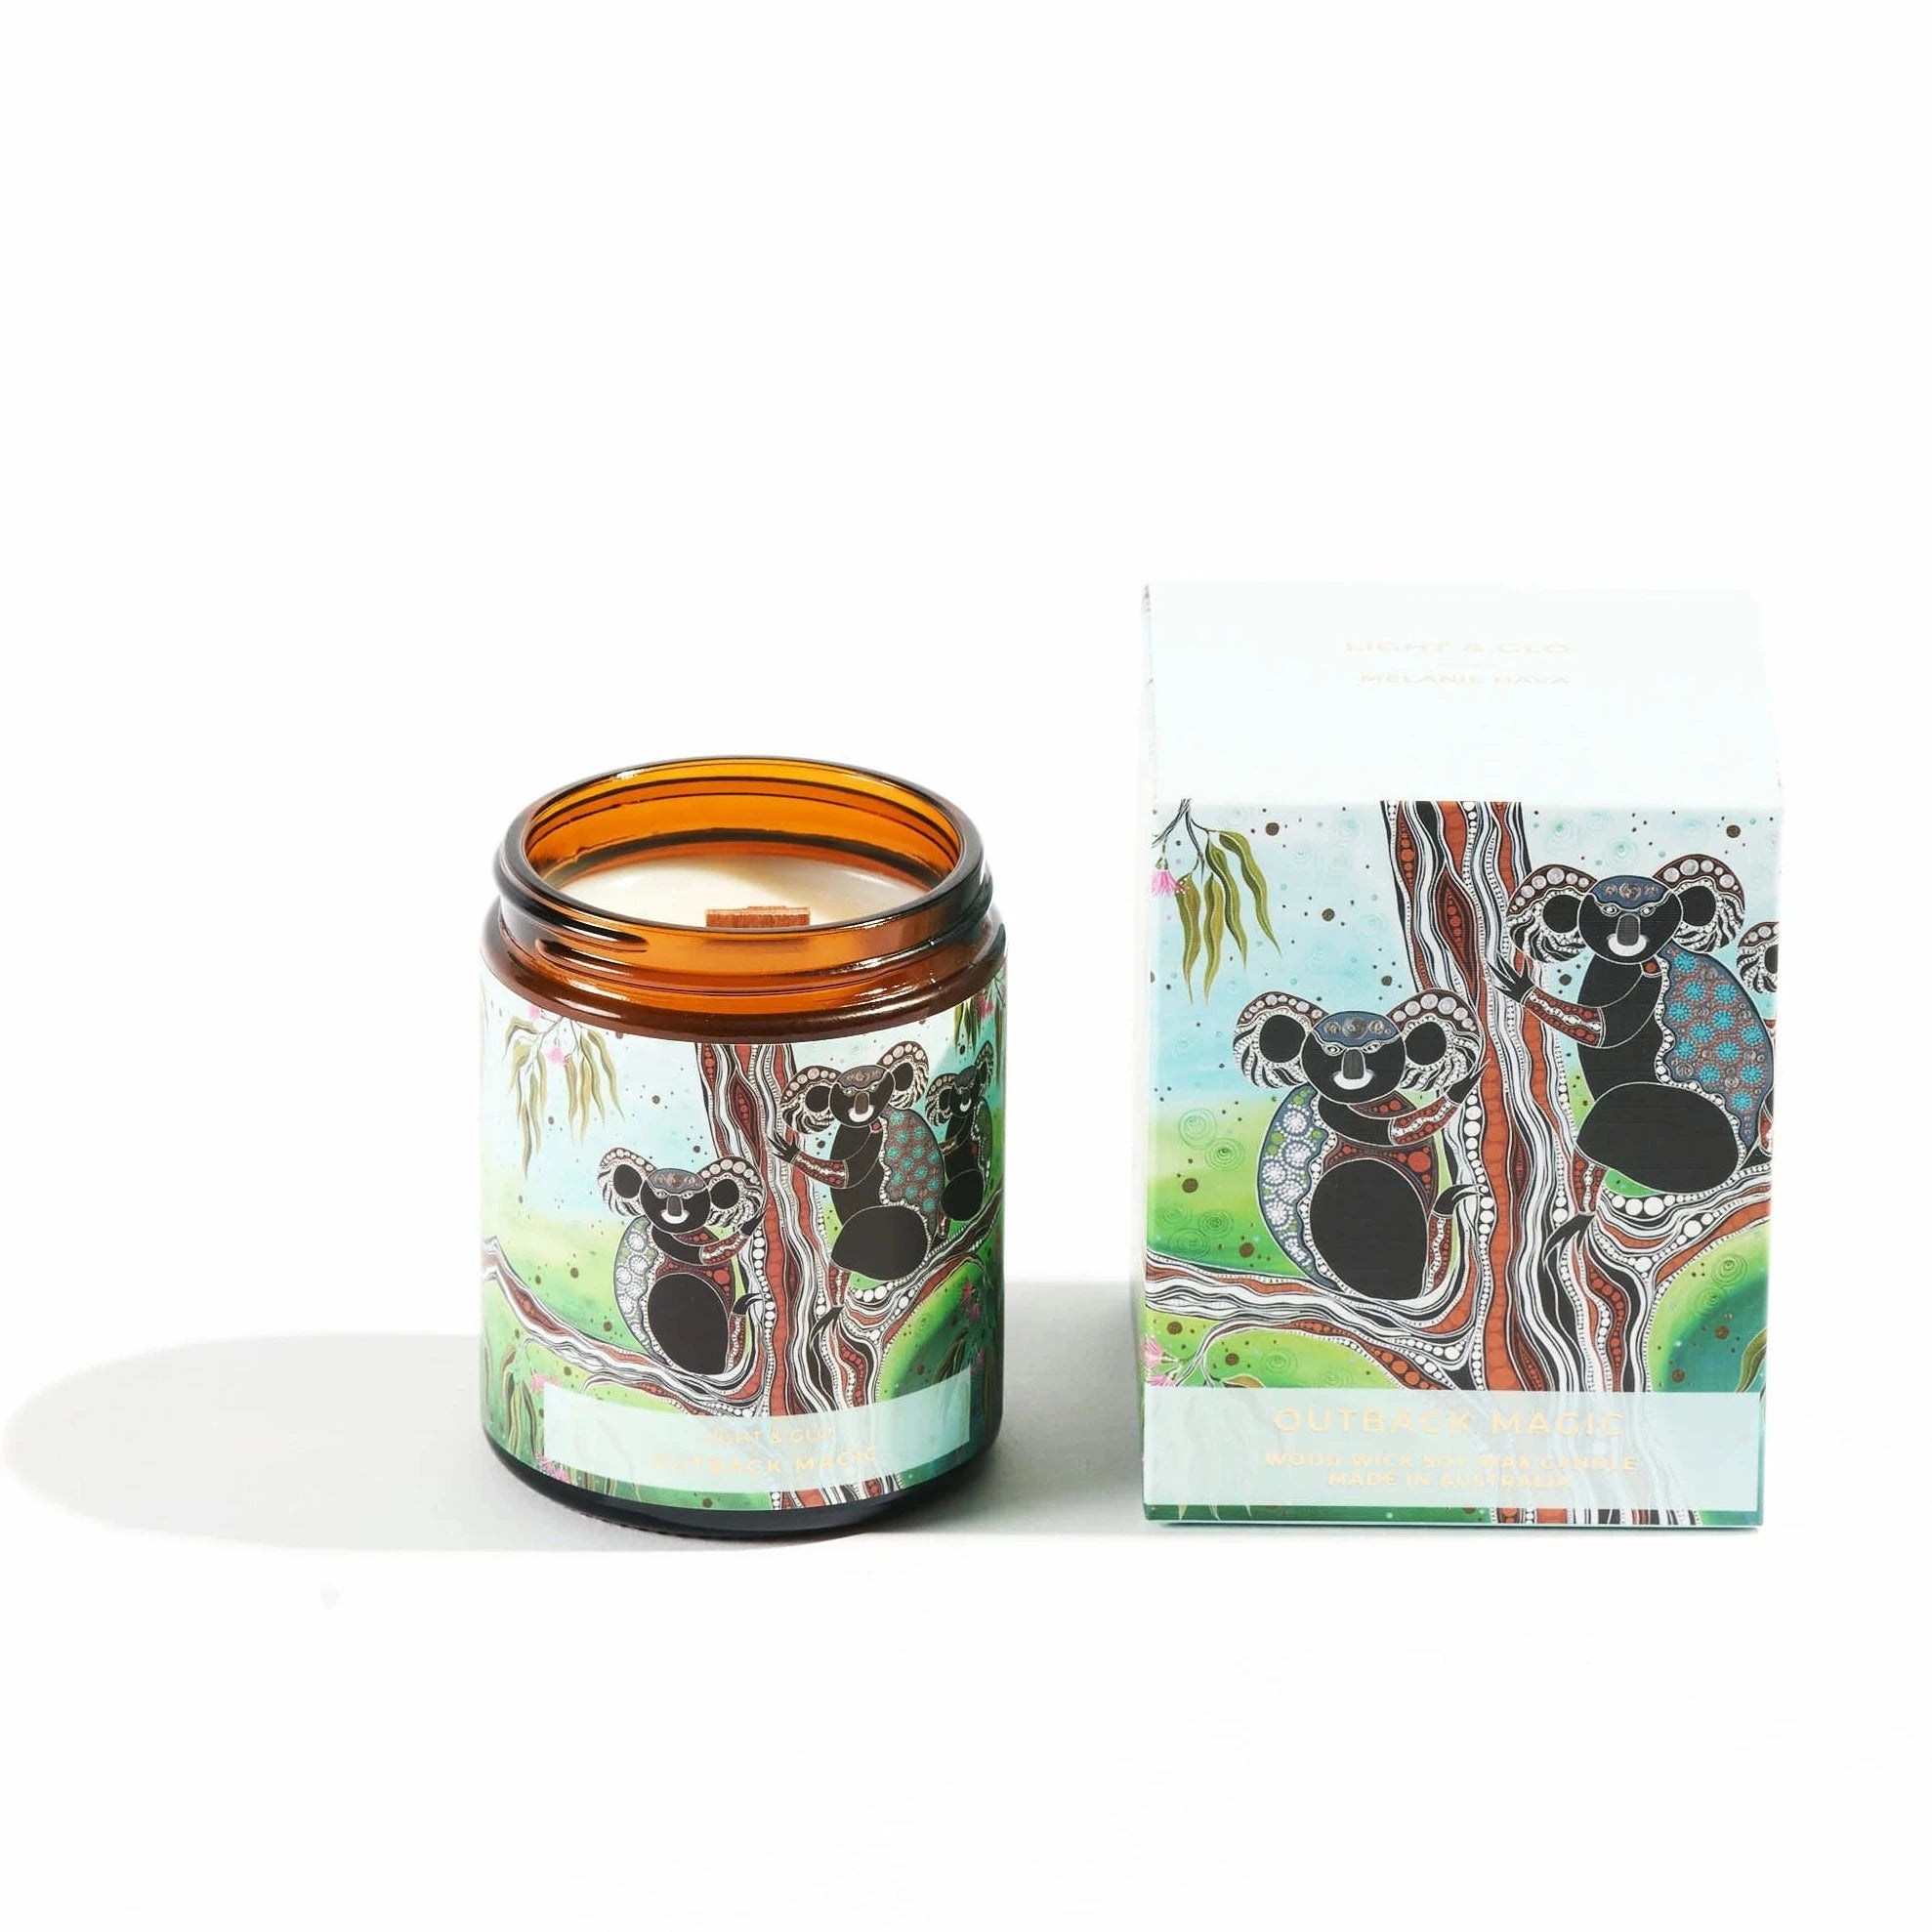 Candle in brown jar with aborigial design koala lable sitting next to gift box with the same koala print.